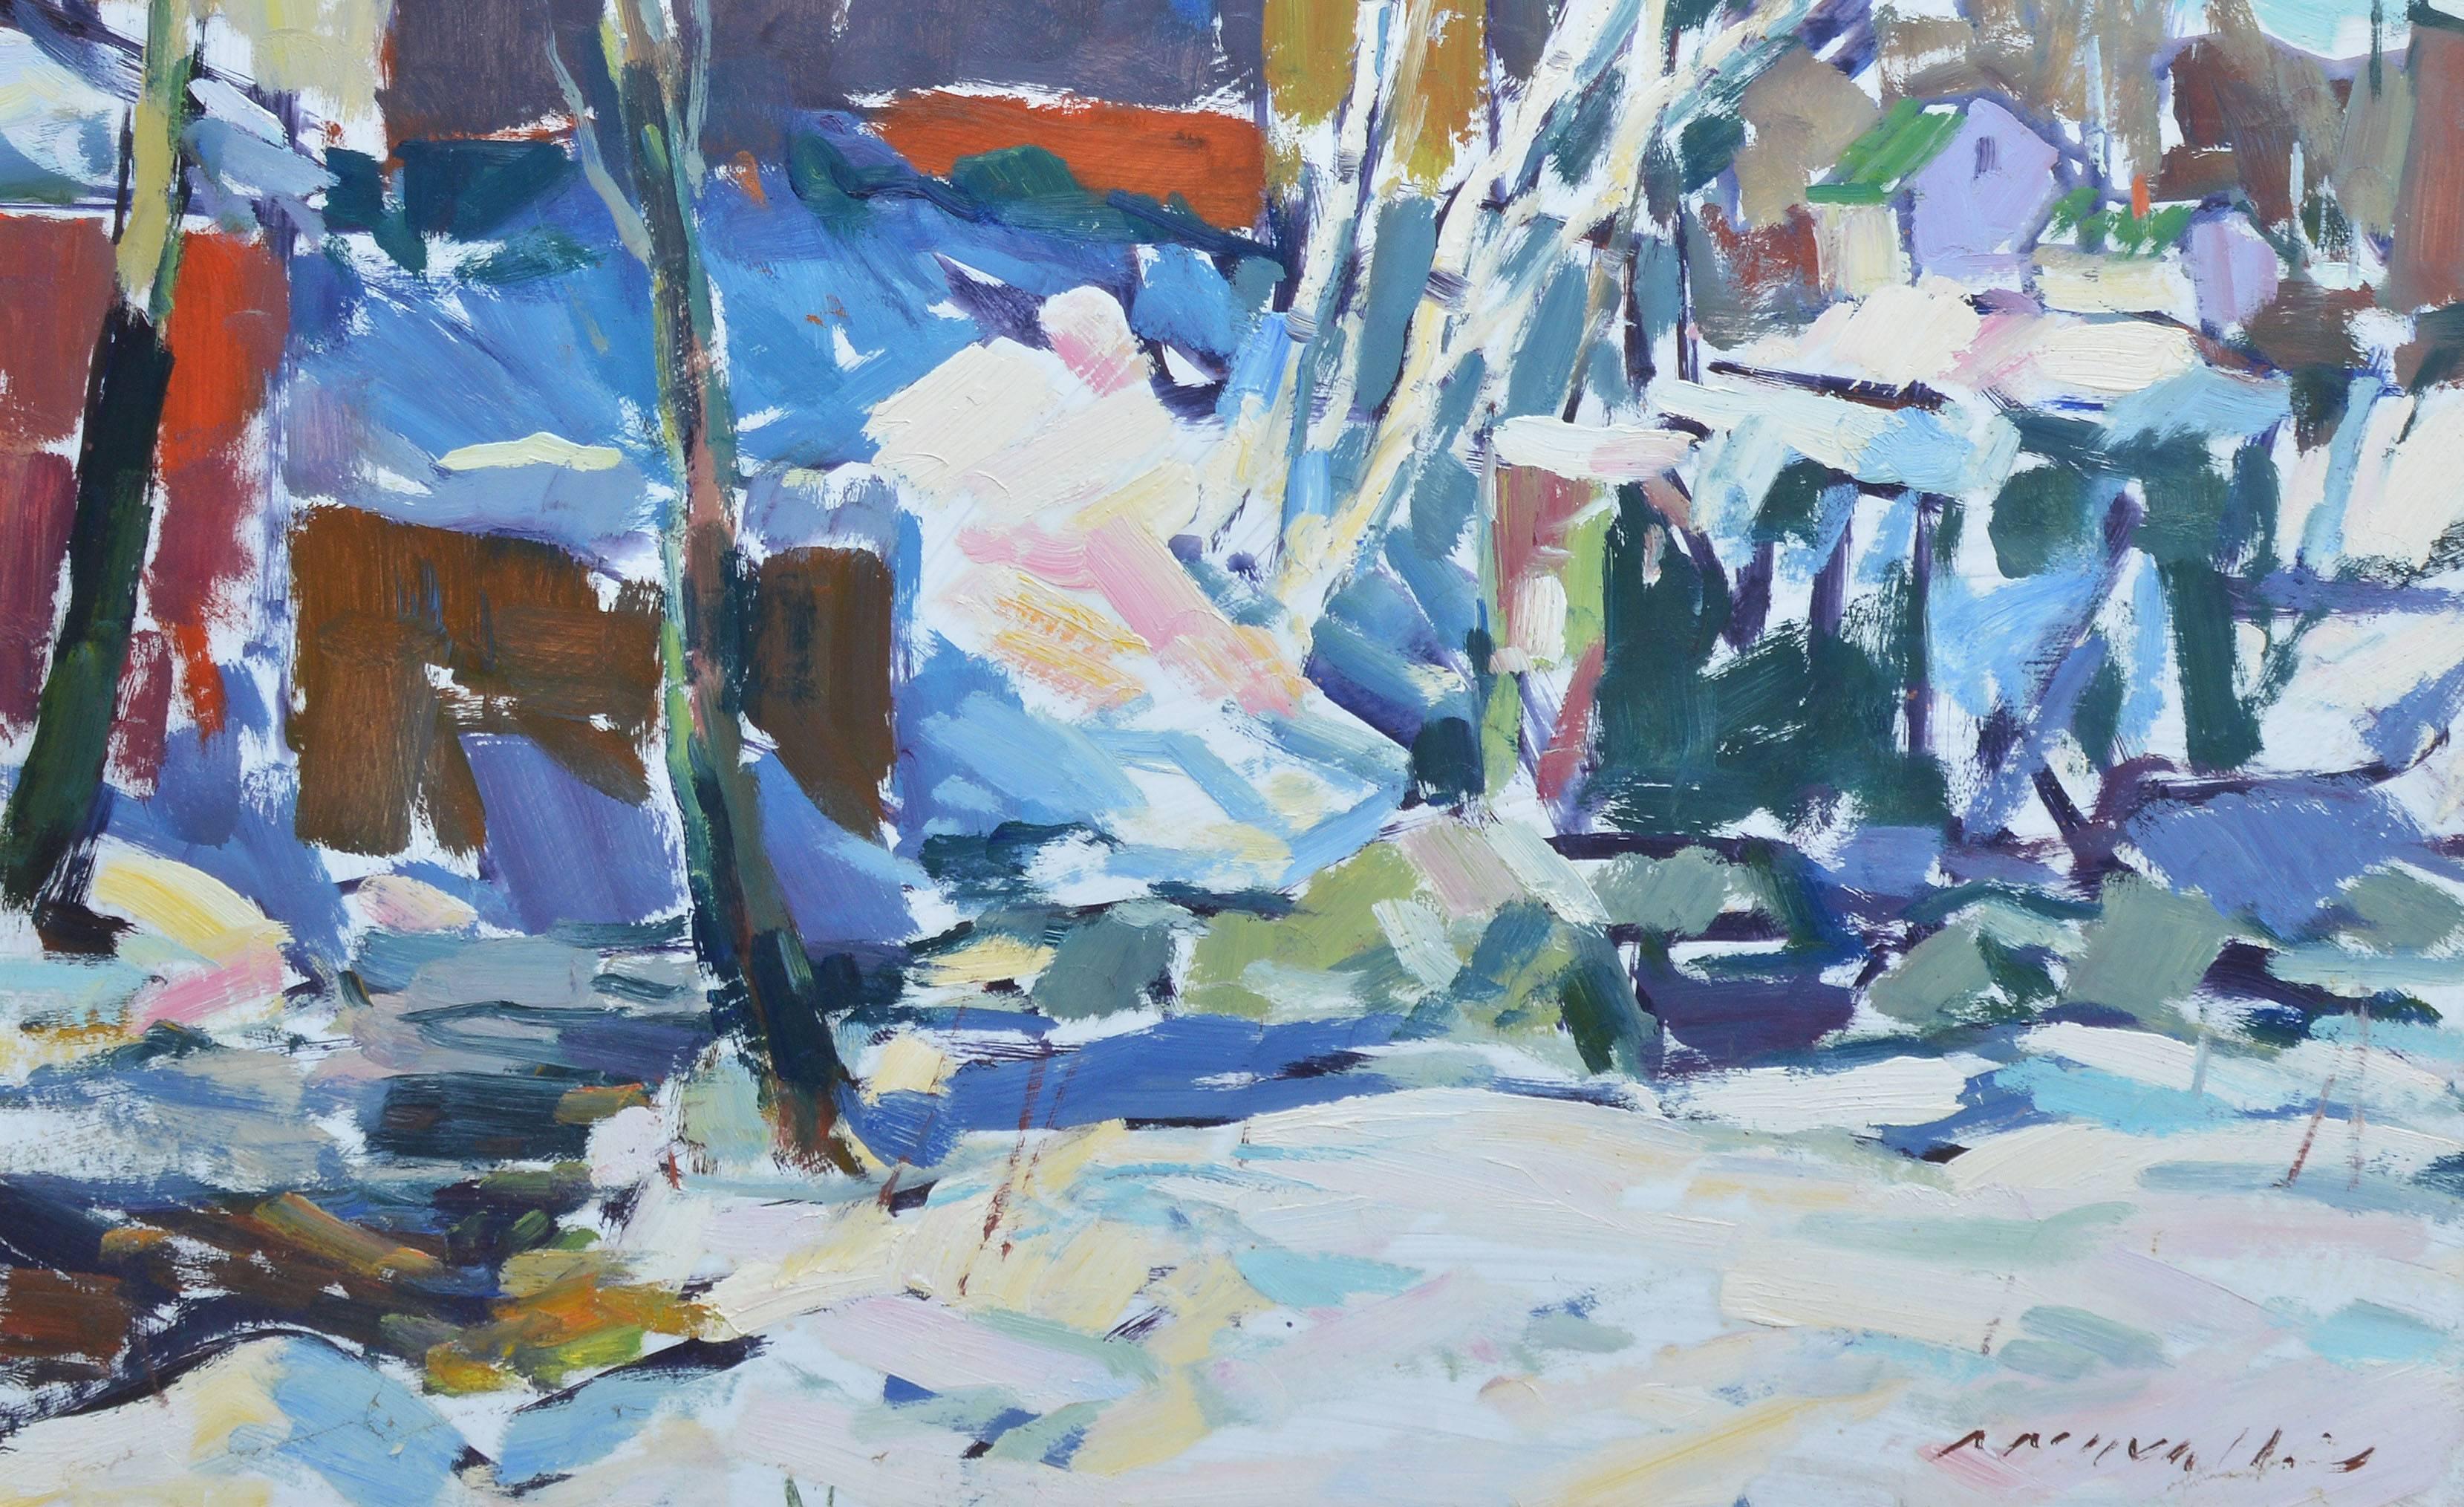 Impressionist winter landscape by Charles Movalli (1945 2016).  Oil on board, circa 1970.  Signed lower right, "Movalli".  Displayed in a white wood frame.  Image size, 24"L 20"H, overall, 30"L x 26"H. 